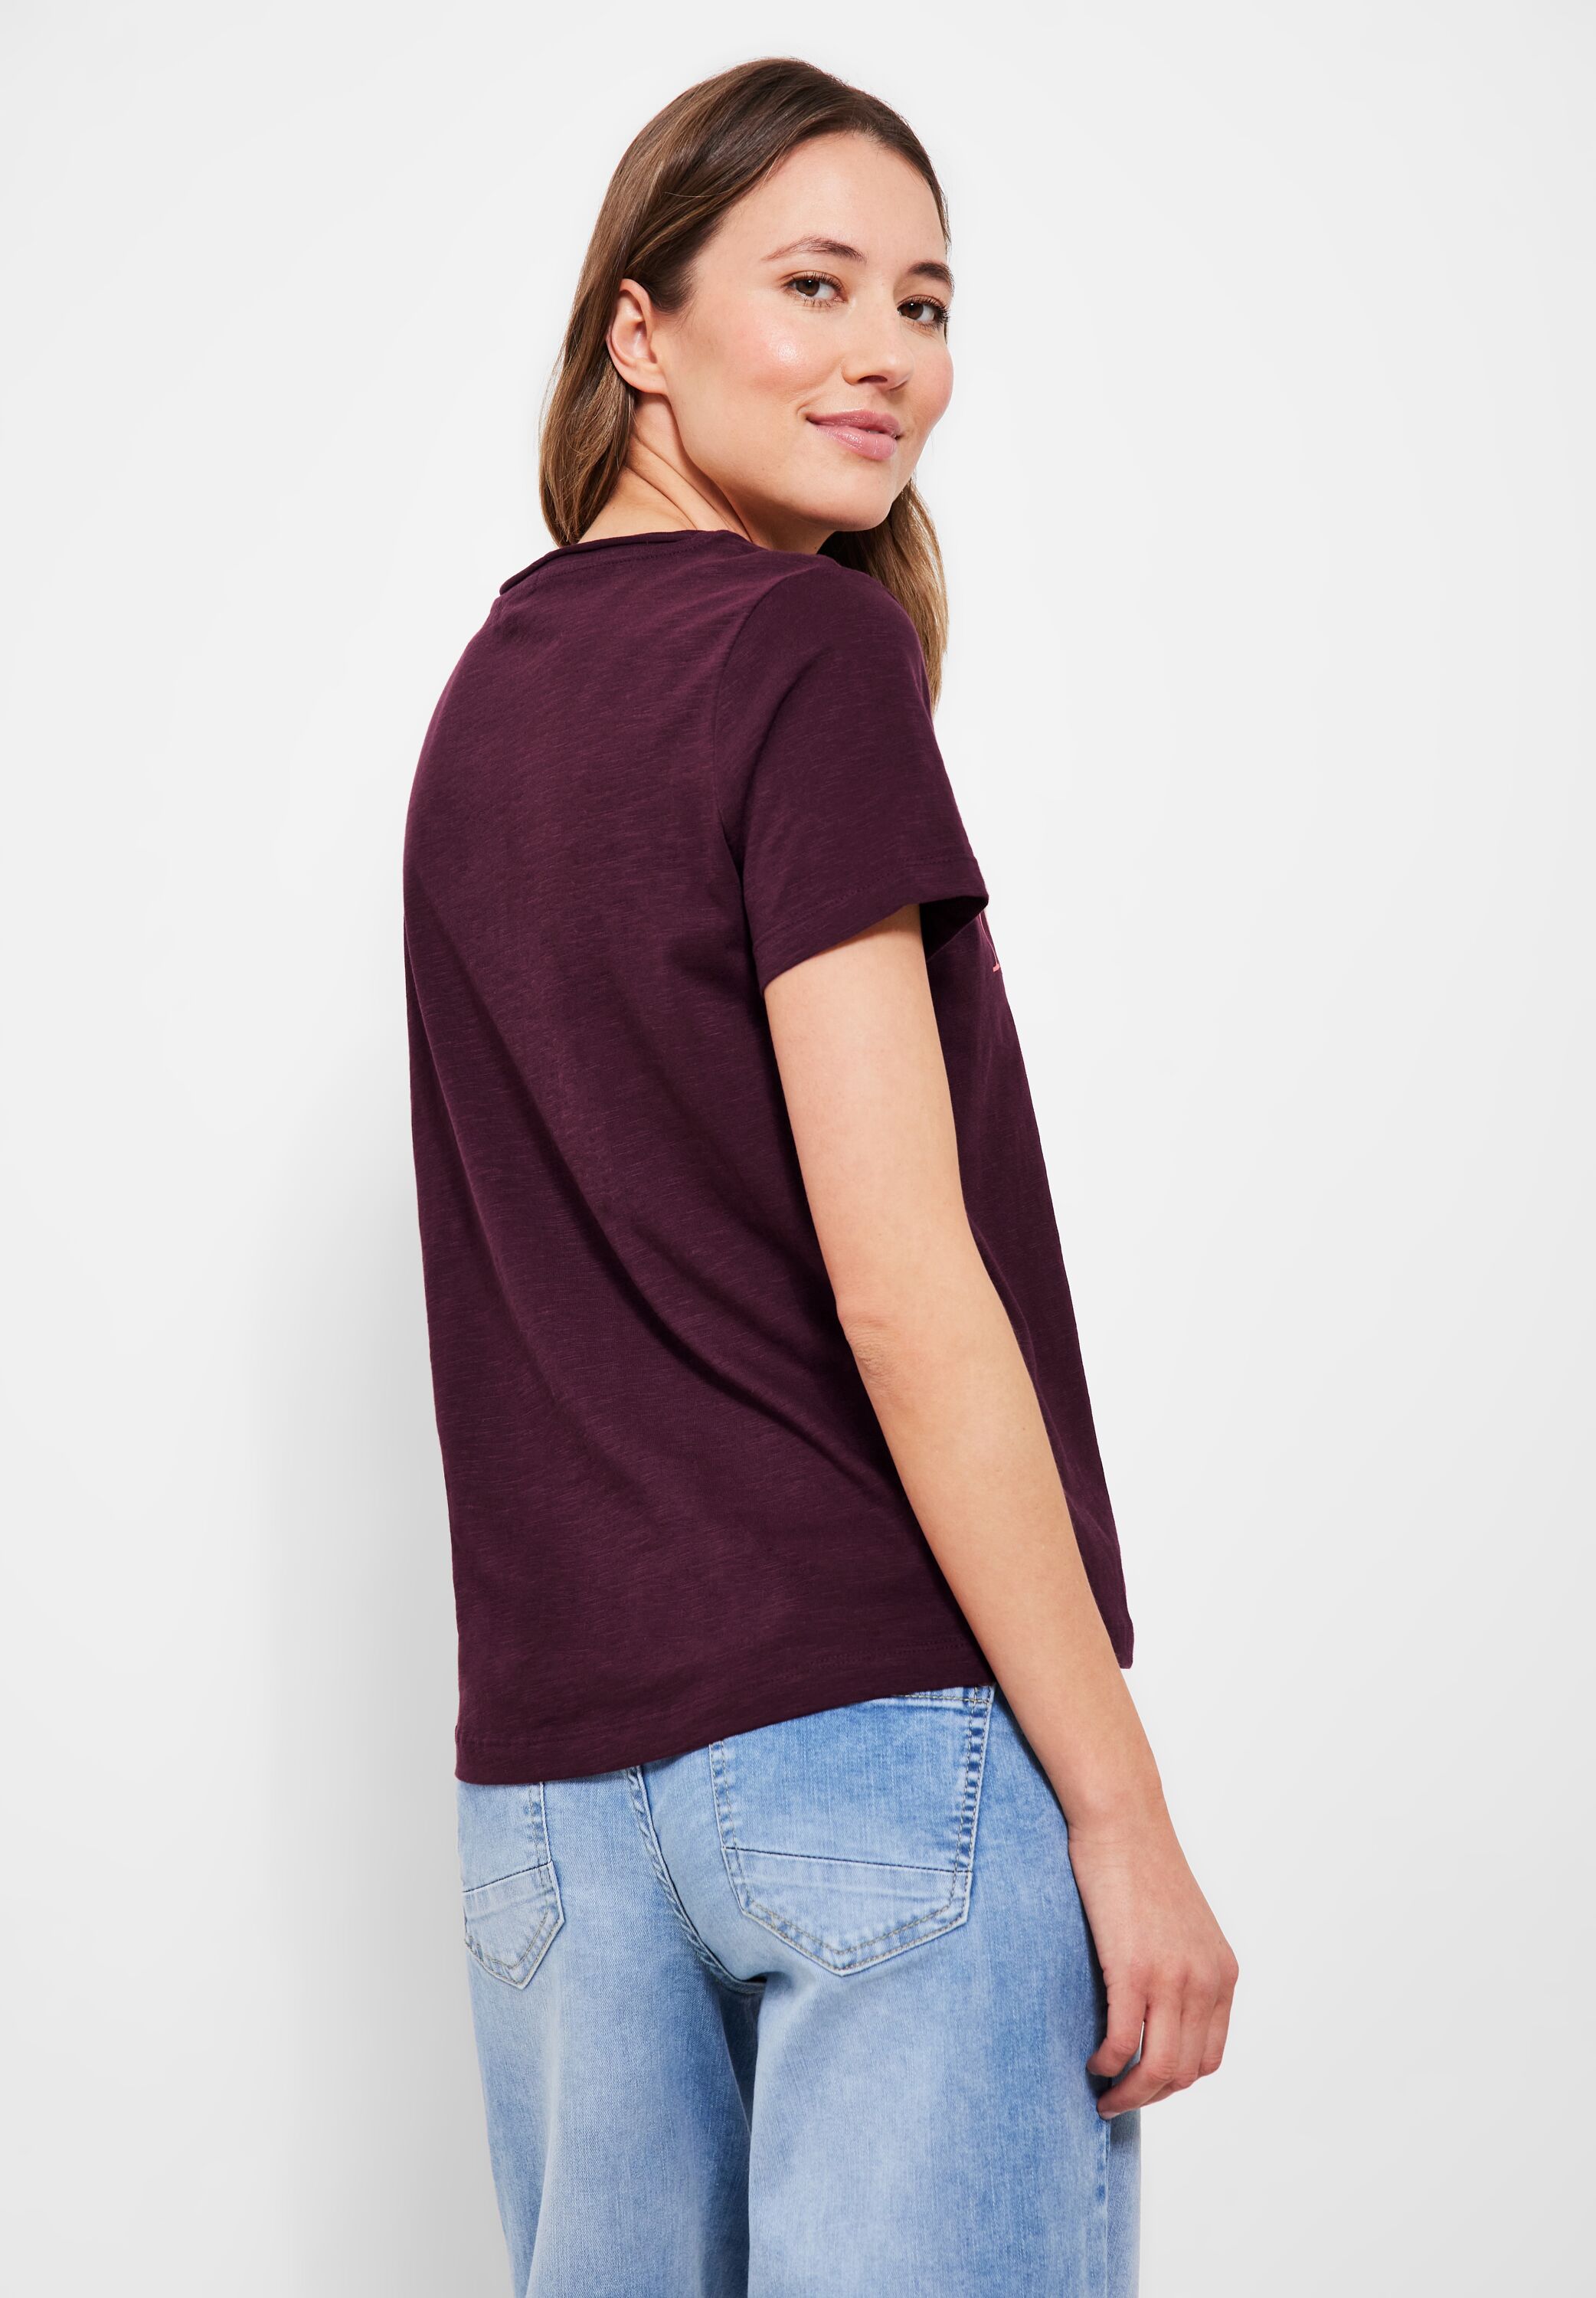 CECIL T-Shirt in Wineberry - Red SALE reduziert CONCEPT im B319637-34918 Mode